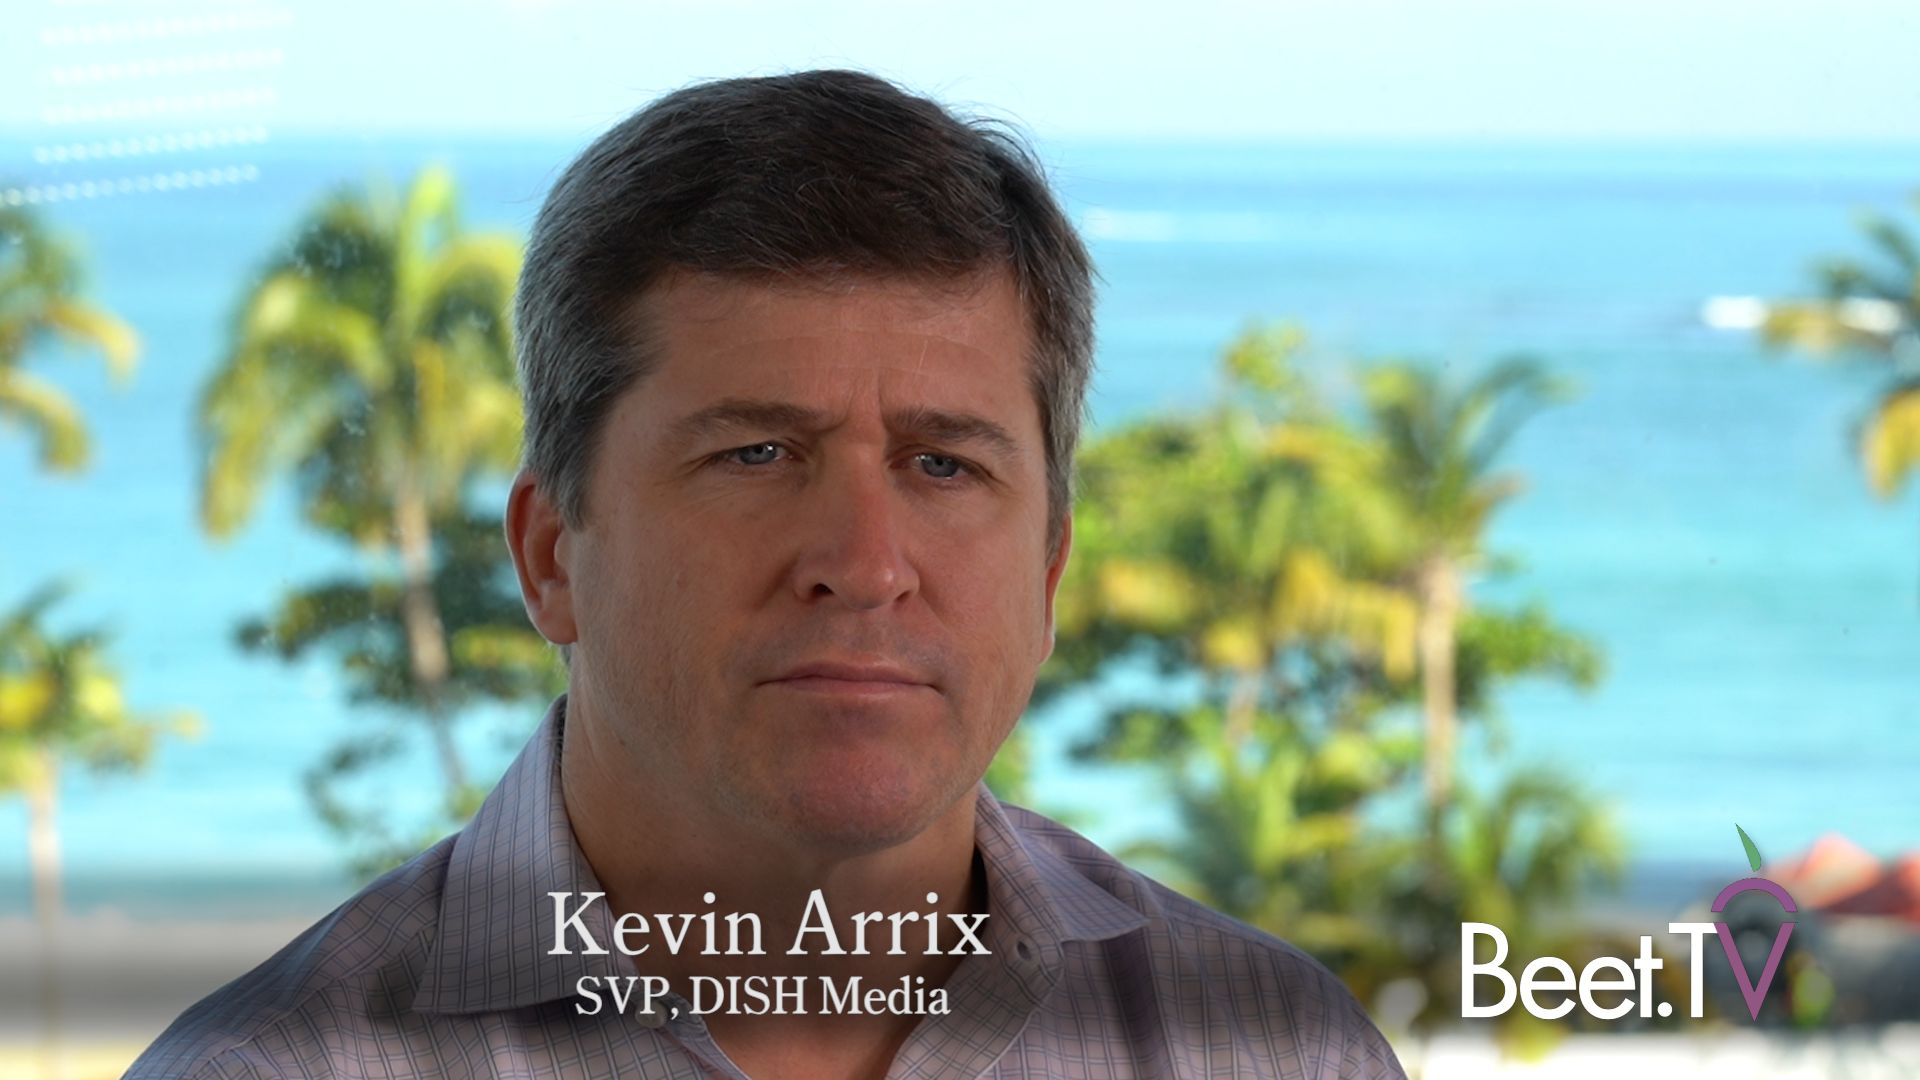 More Front-End Automation Needed For Addressable TV: DISH’s Arrix